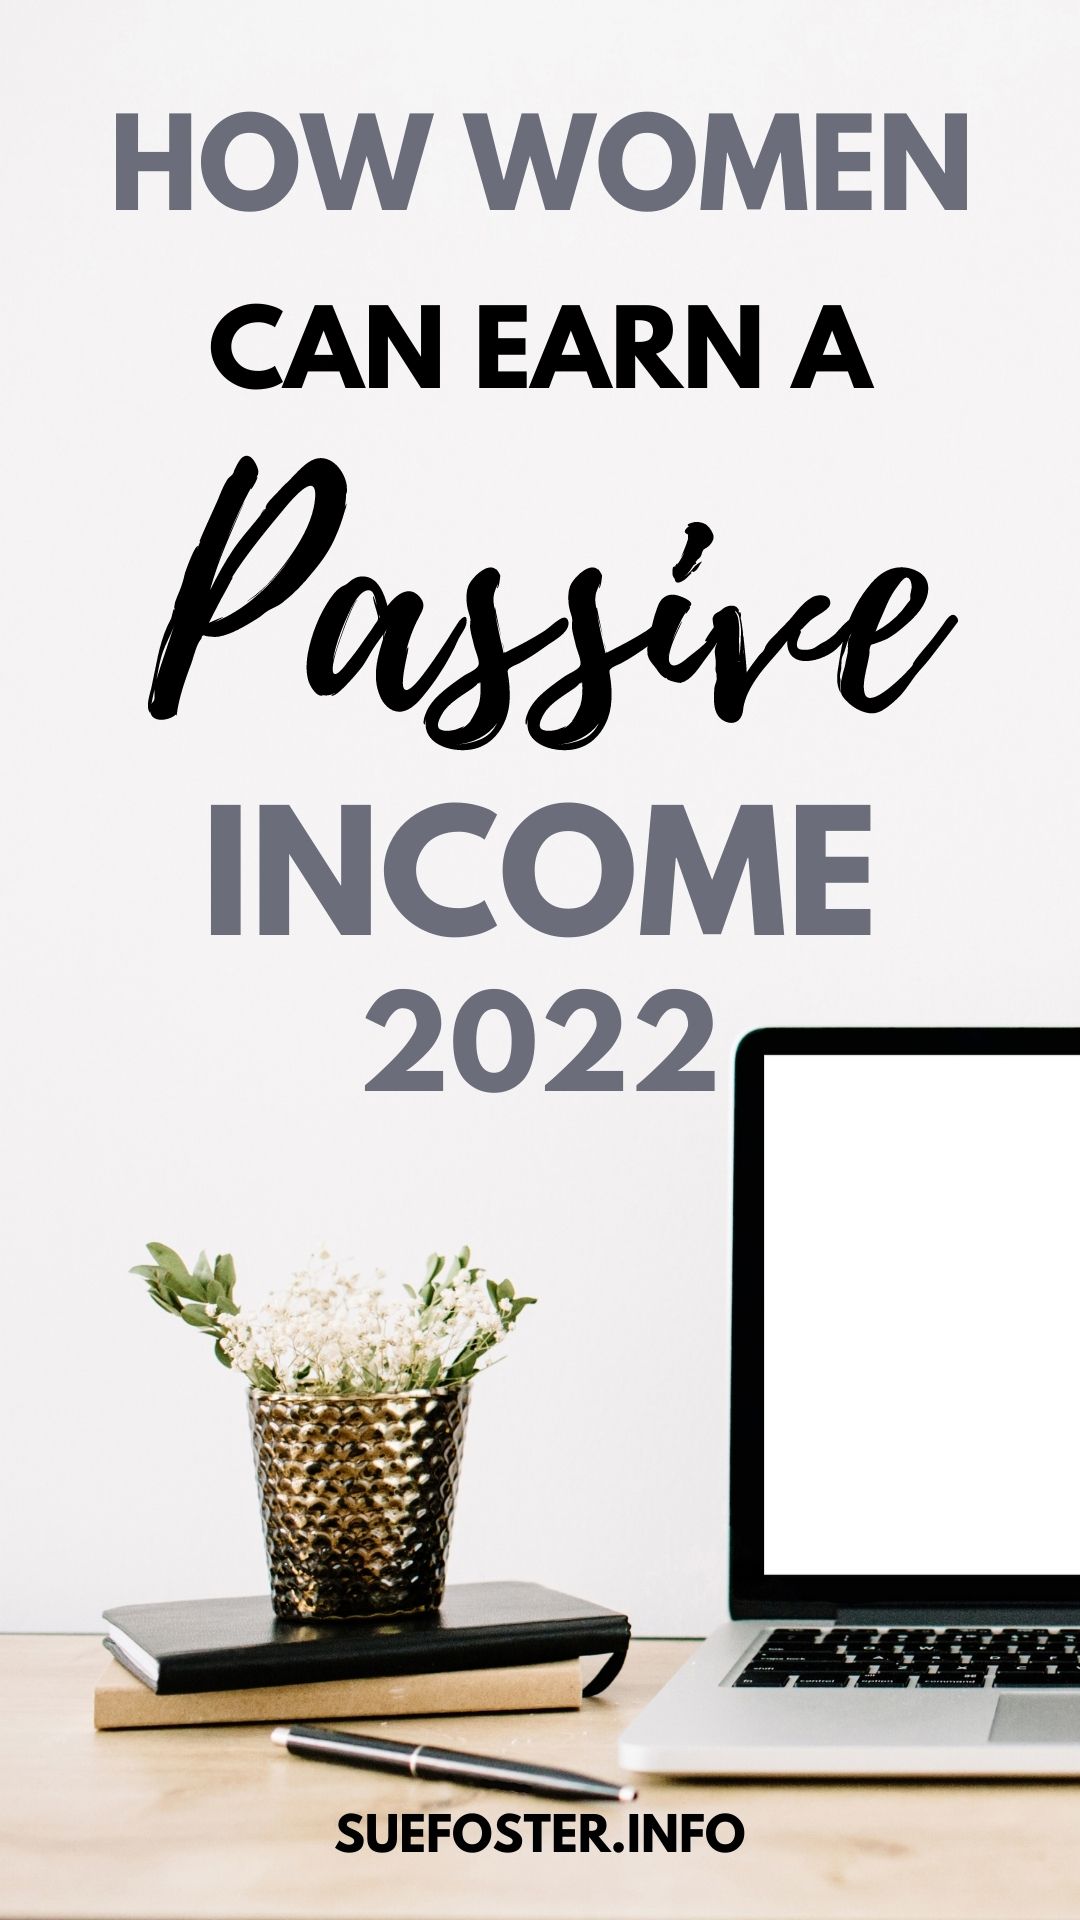 Women need to become financially independent by generating passive income so that they don't have to face any financial problems.